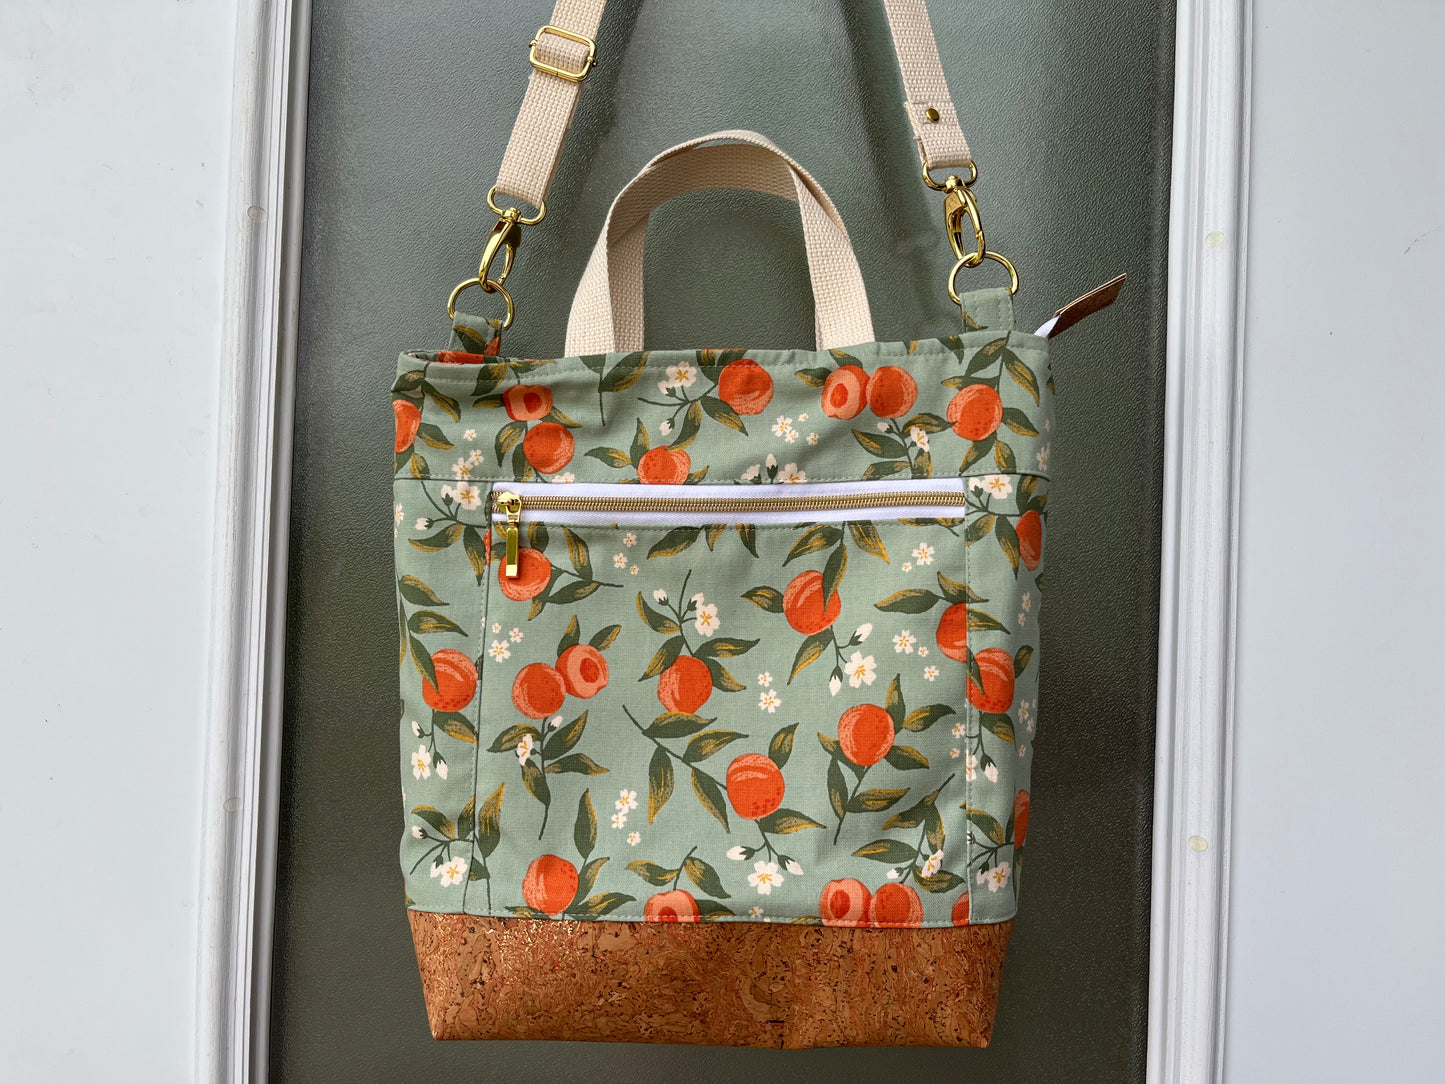 Summer Peaches Fruit Themed Cross body Tote Bag